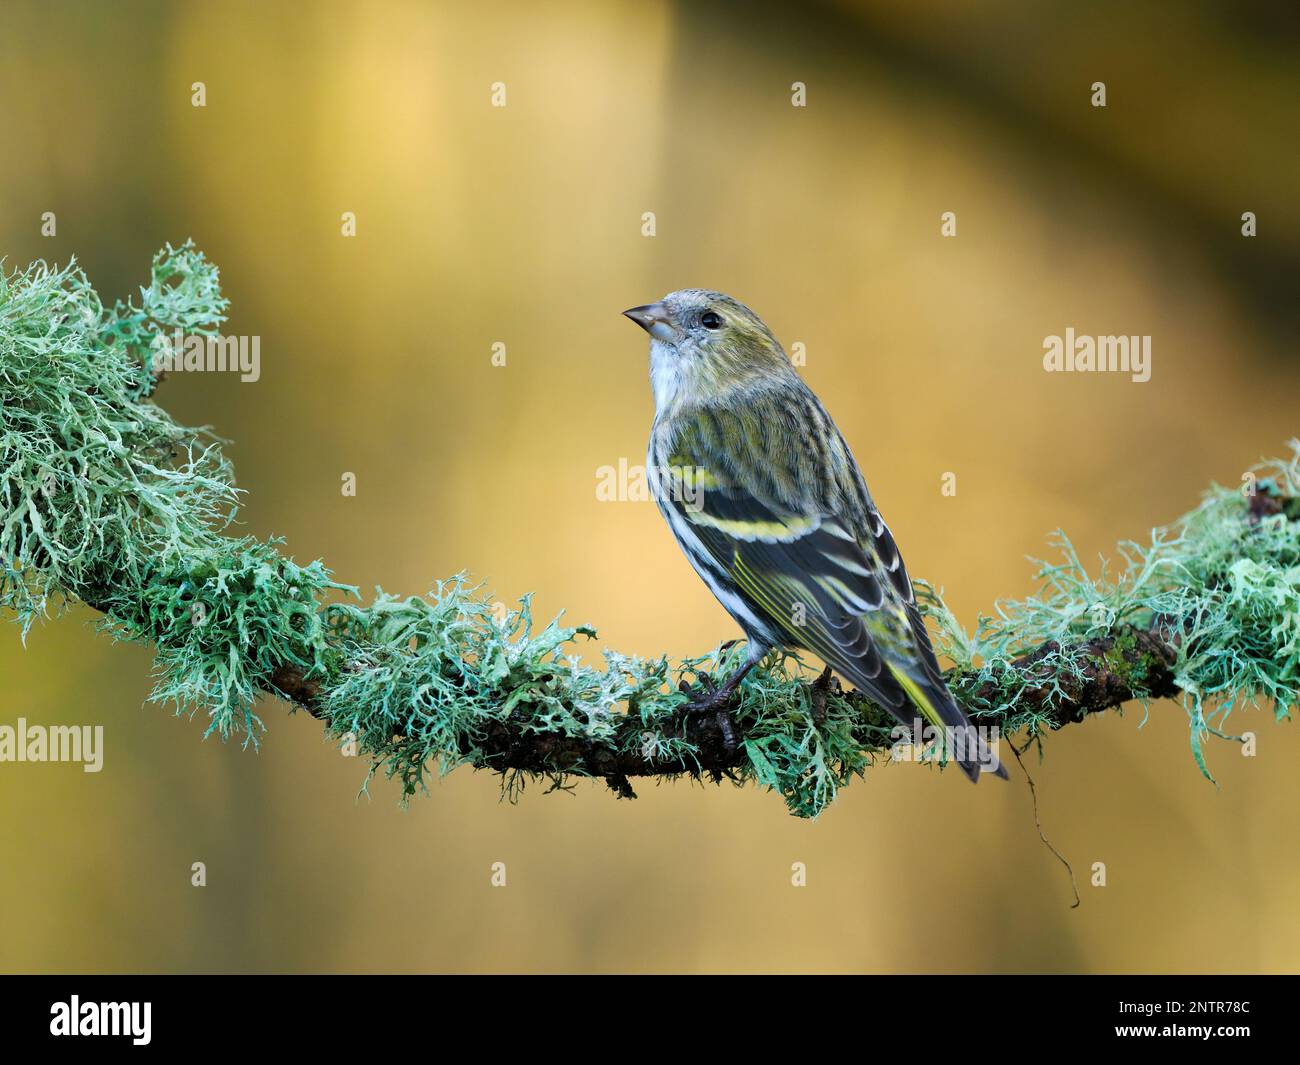 A female siskin (Spinus spinus) perched on a lichen covered branch with a clean unobtrusive background. Photographed in December in Dorset. Stock Photo